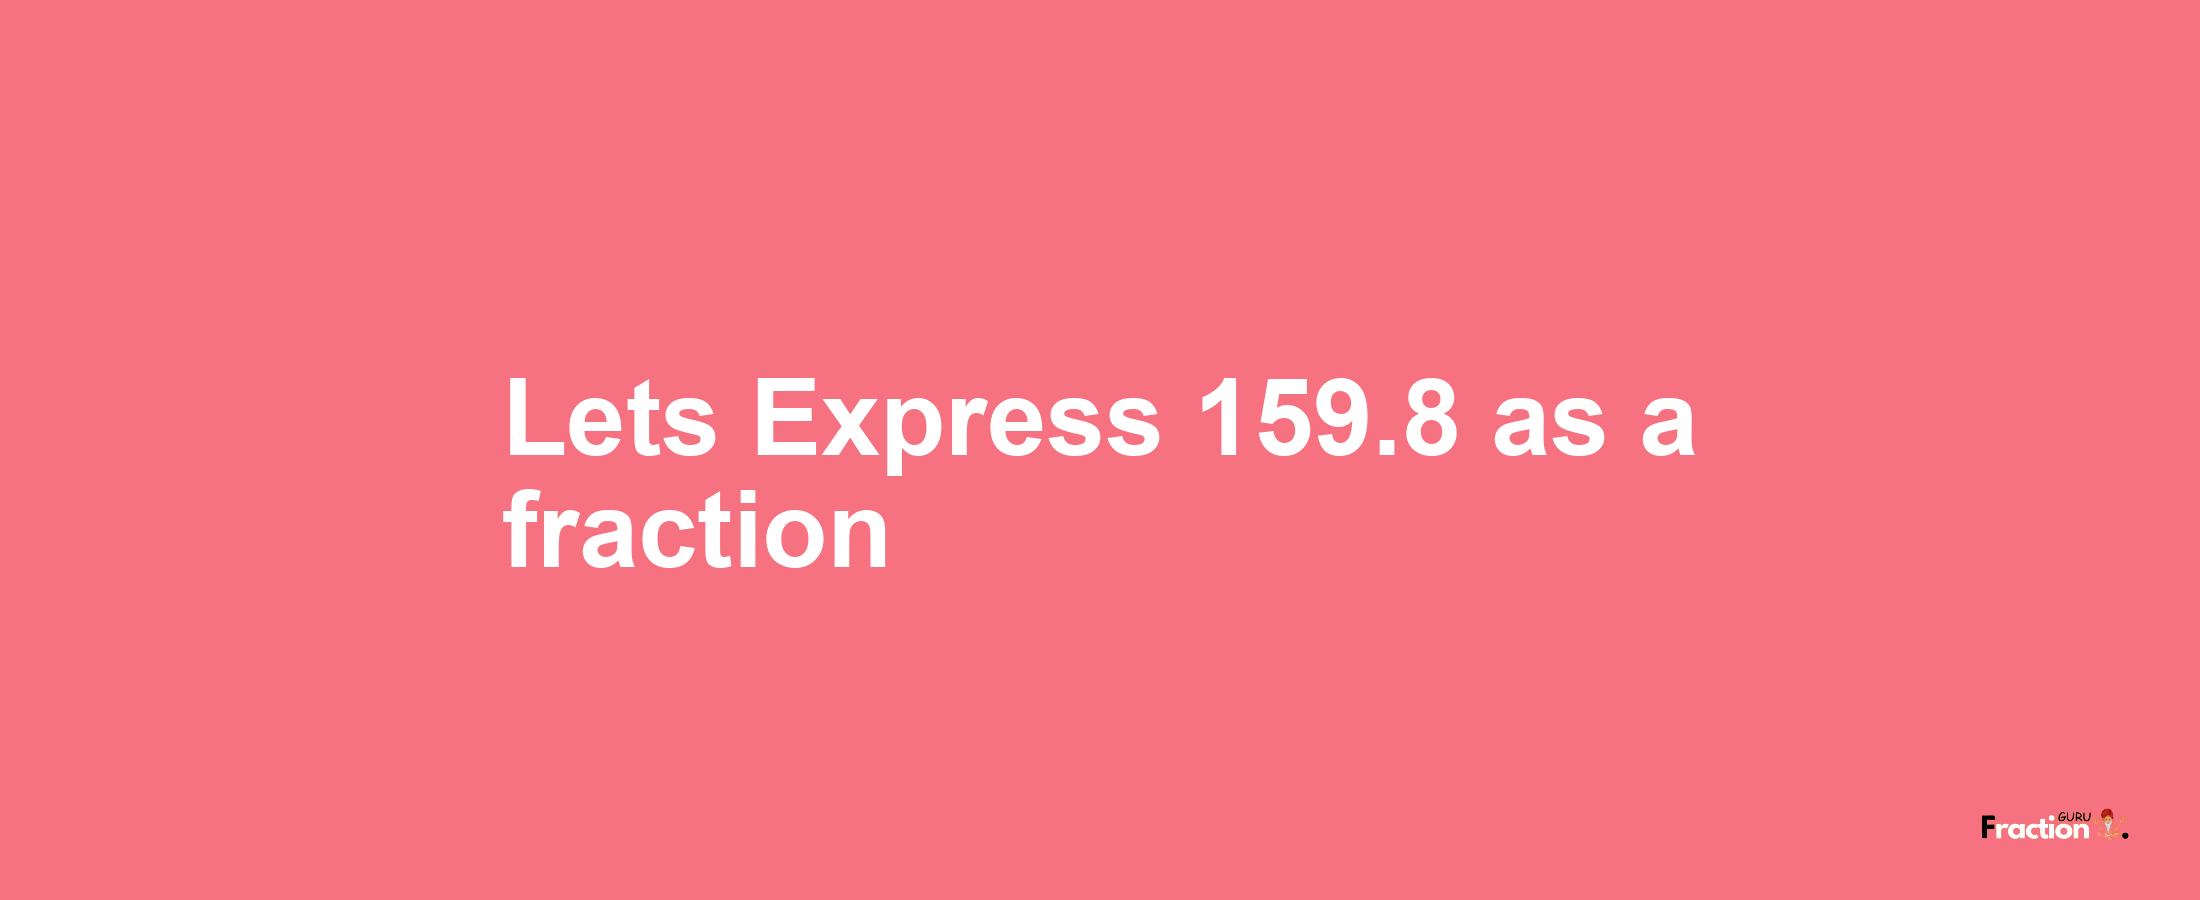 Lets Express 159.8 as afraction